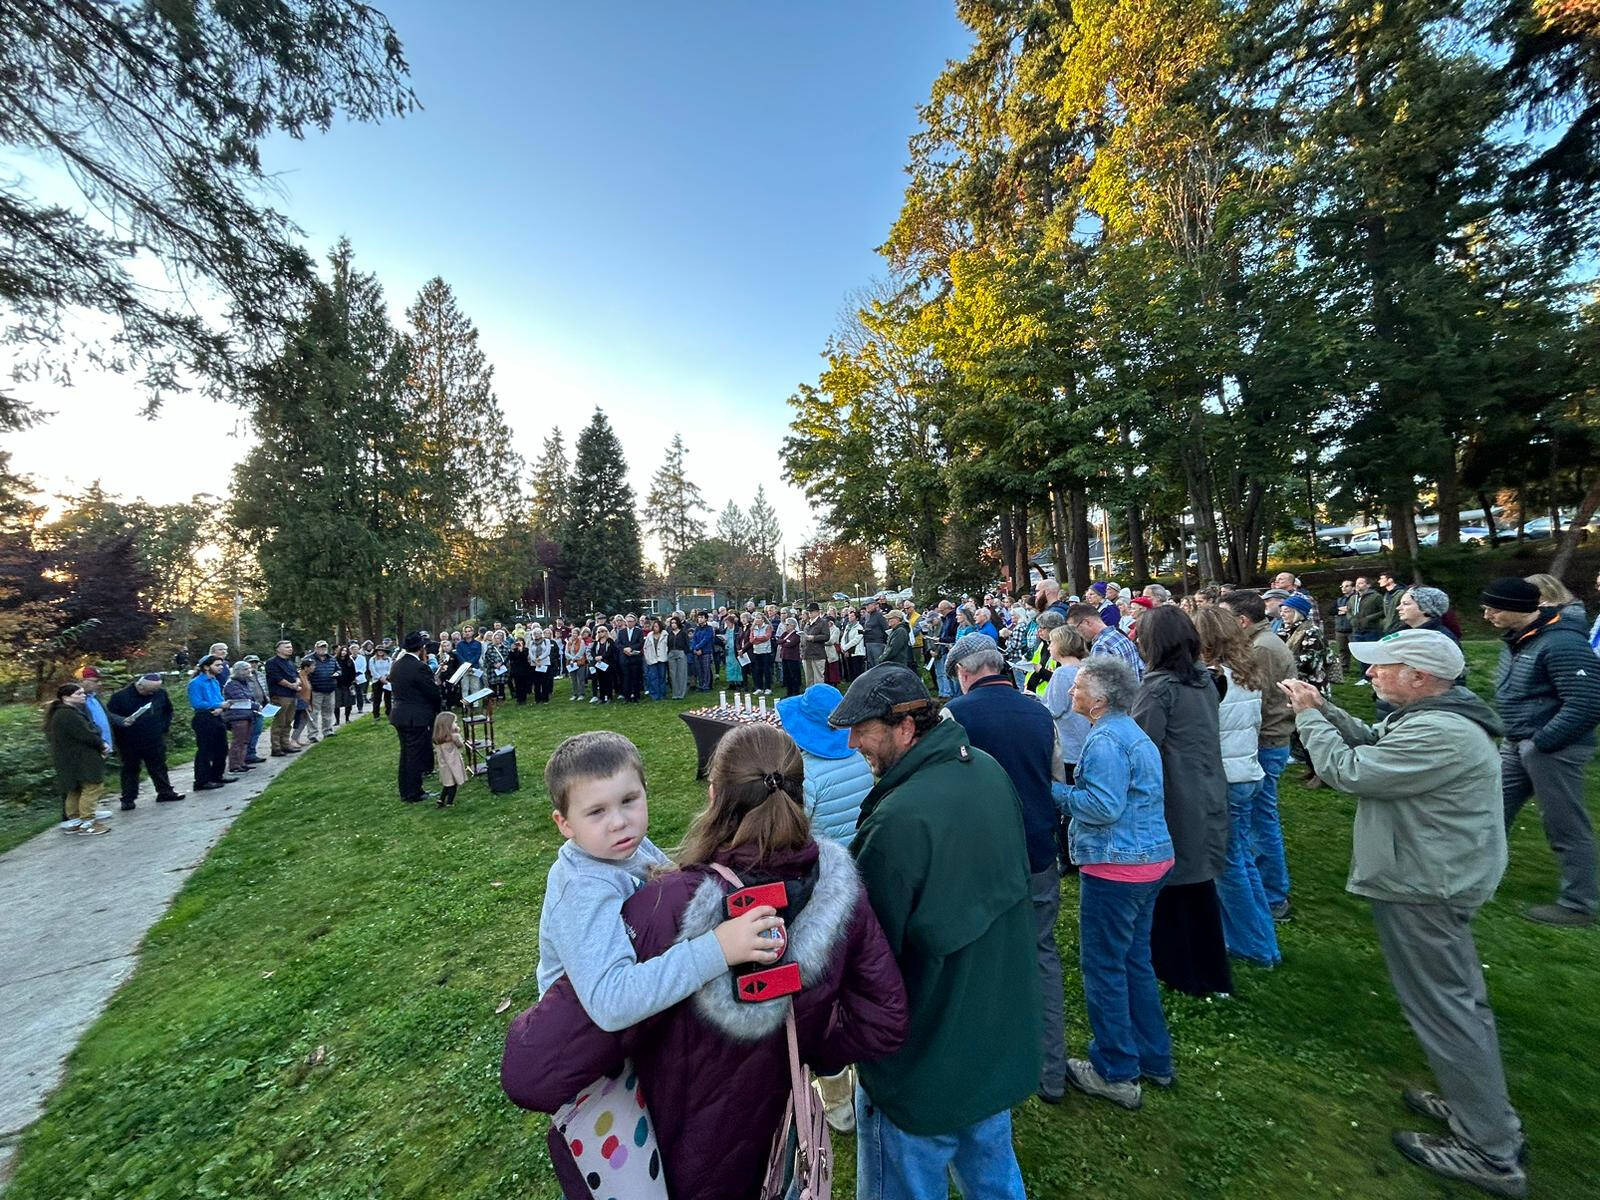 Mendy Goldshmid courtesy photos
The Jewish community from Bainbridge Island and Kitsap County gathered at Waterfront Park on the evening of Oct. 12 for a prayer and unity rally in the wake of Hamas attacks on Israel.